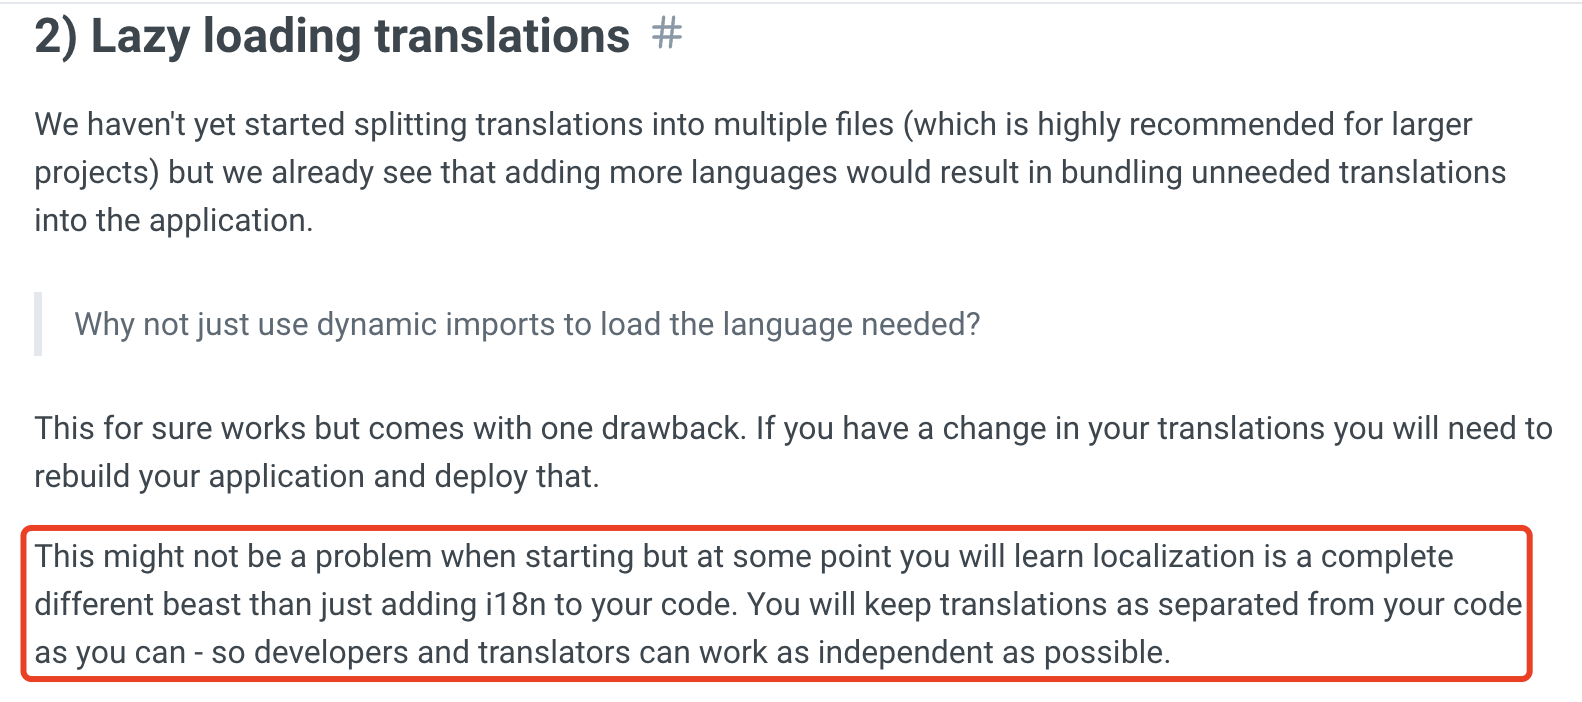 Why not just use dynamic imports to load the language needed